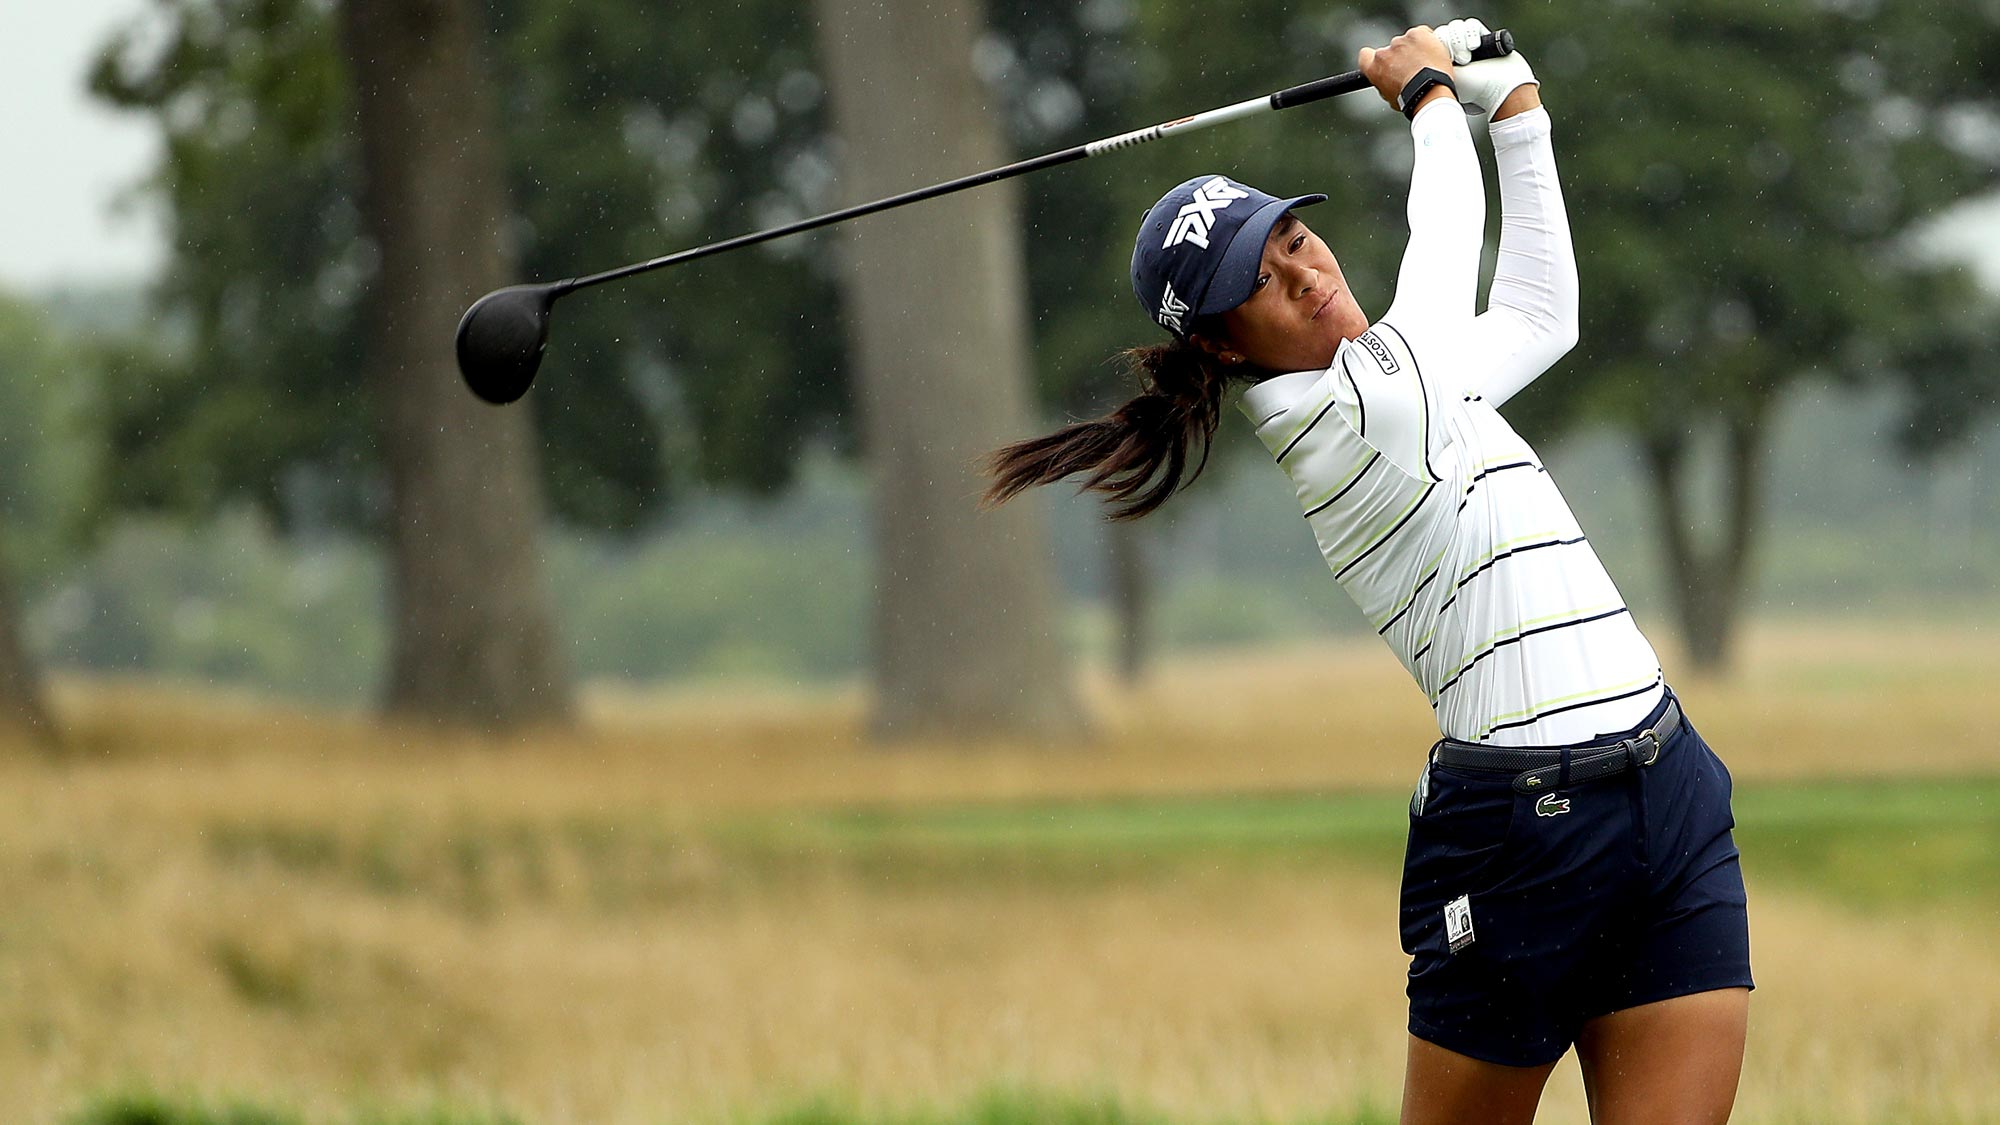 Celine Boutier of France plays her shot from the 17th tee during the second round of the LPGA Drive On Championship